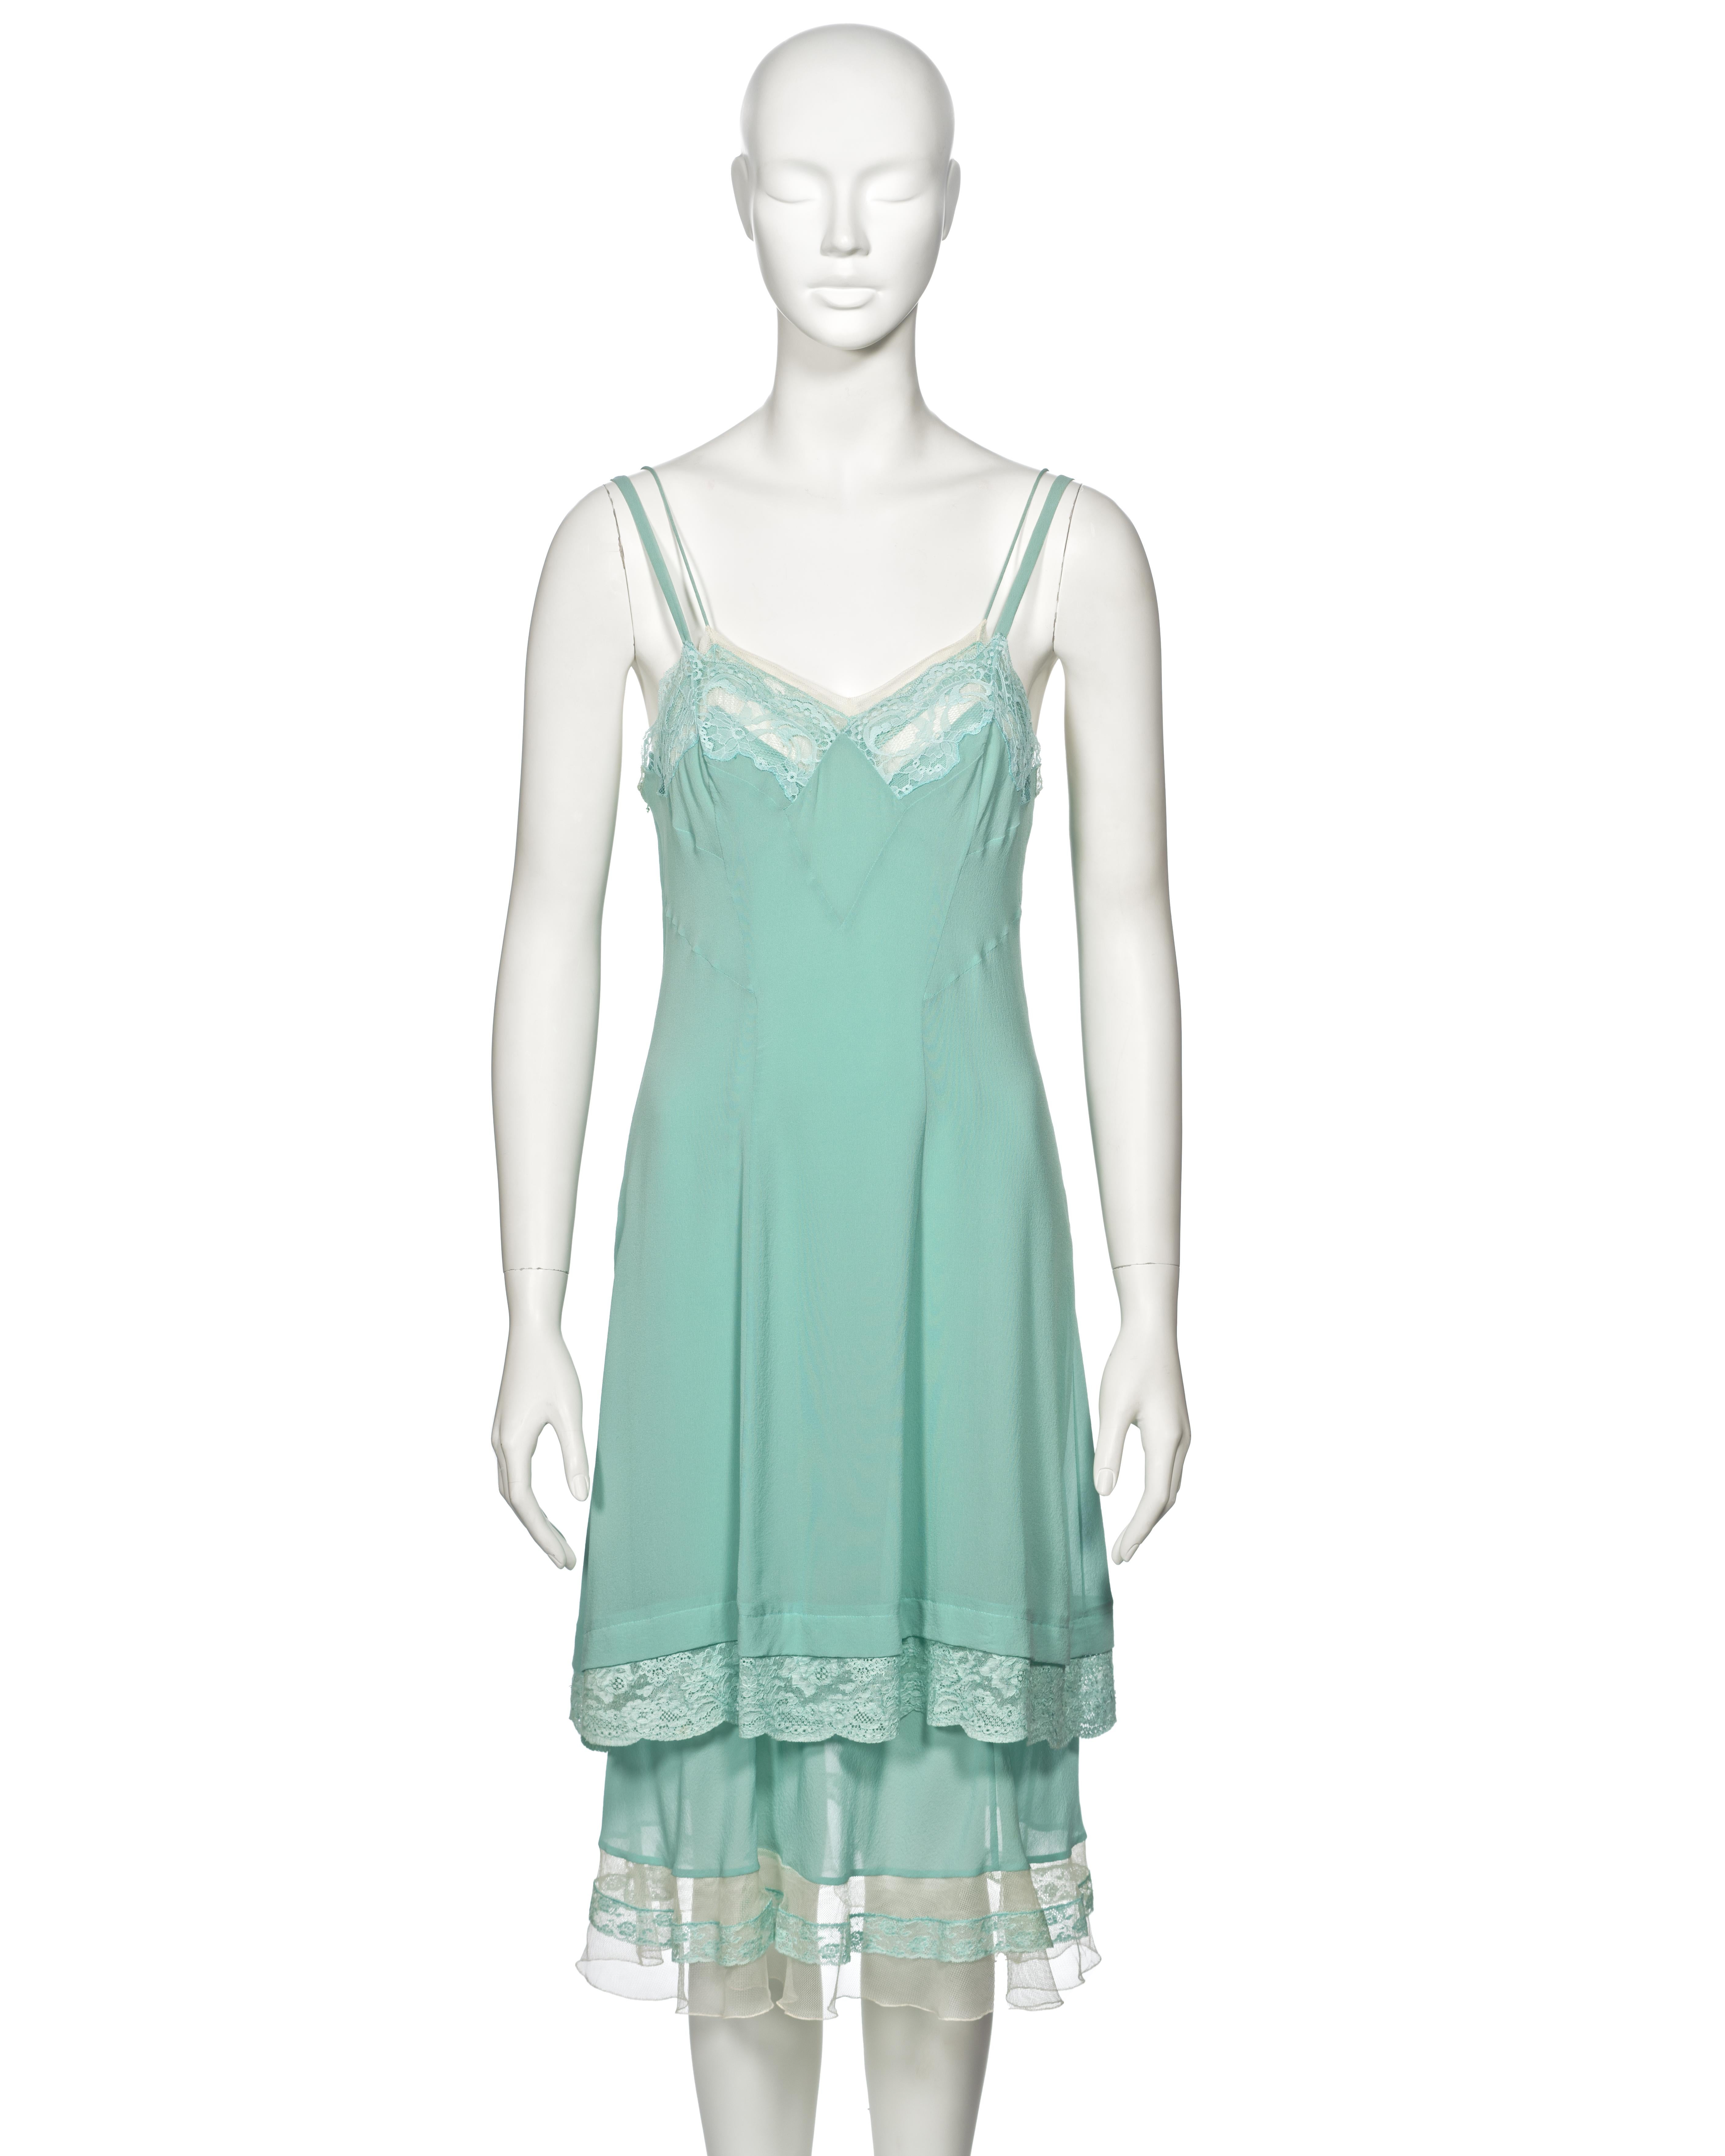 ▪ Archival Christian Dior Double Layered Slip Dress
▪ Creative Director: John Galliano
▪ Spring-Summer 2005
▪ Sold by One of a Kind Archive
▪ Constructed from two attached slip dresses 
▪ Turquoise silk 
▪ Ivory lace inserts and trimmings 
▪ Size: